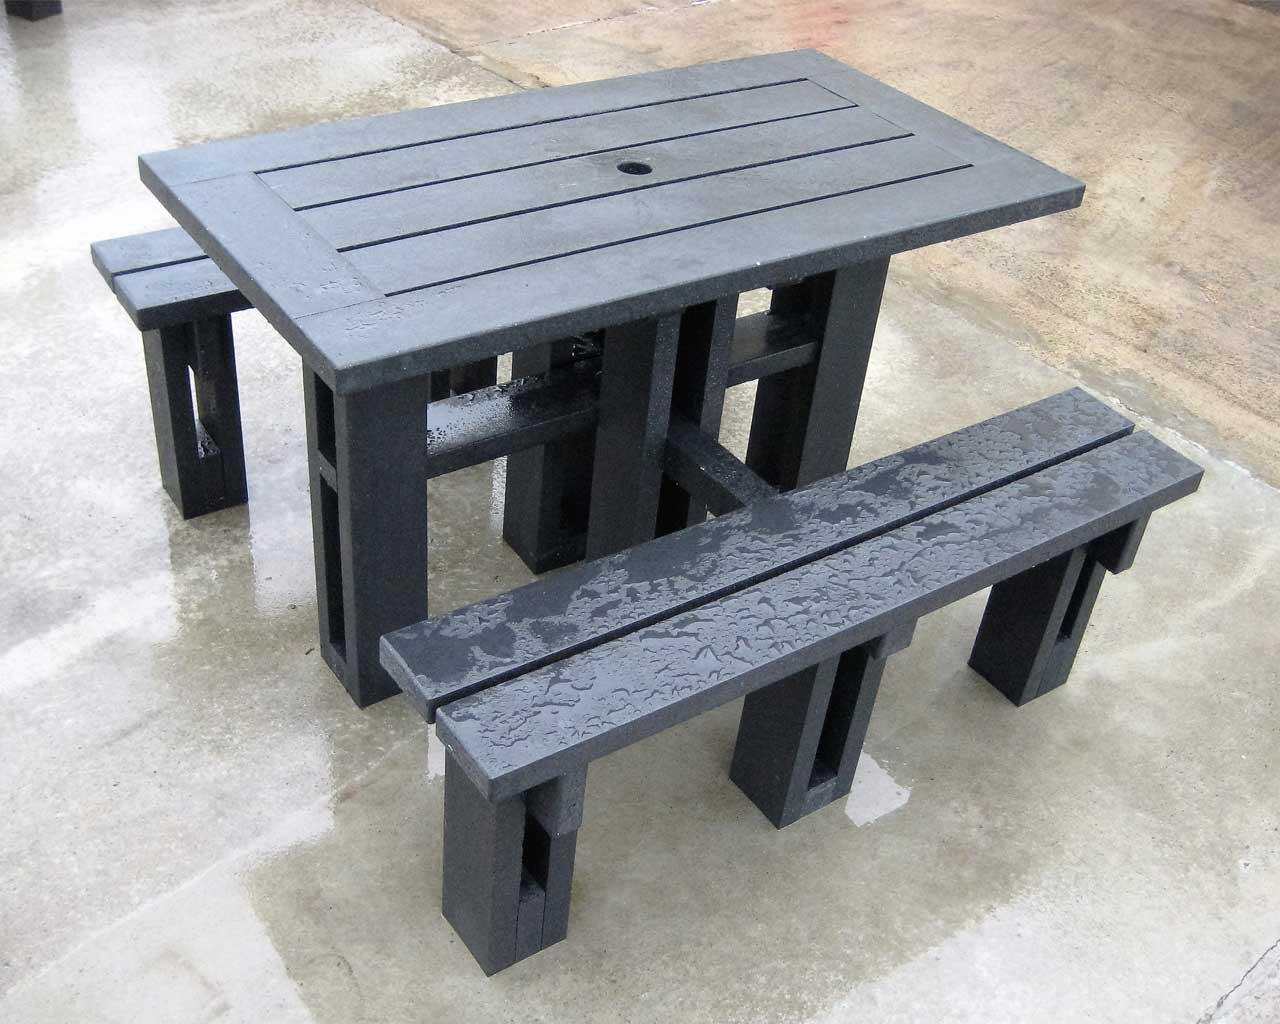 4 sided picnic table without back